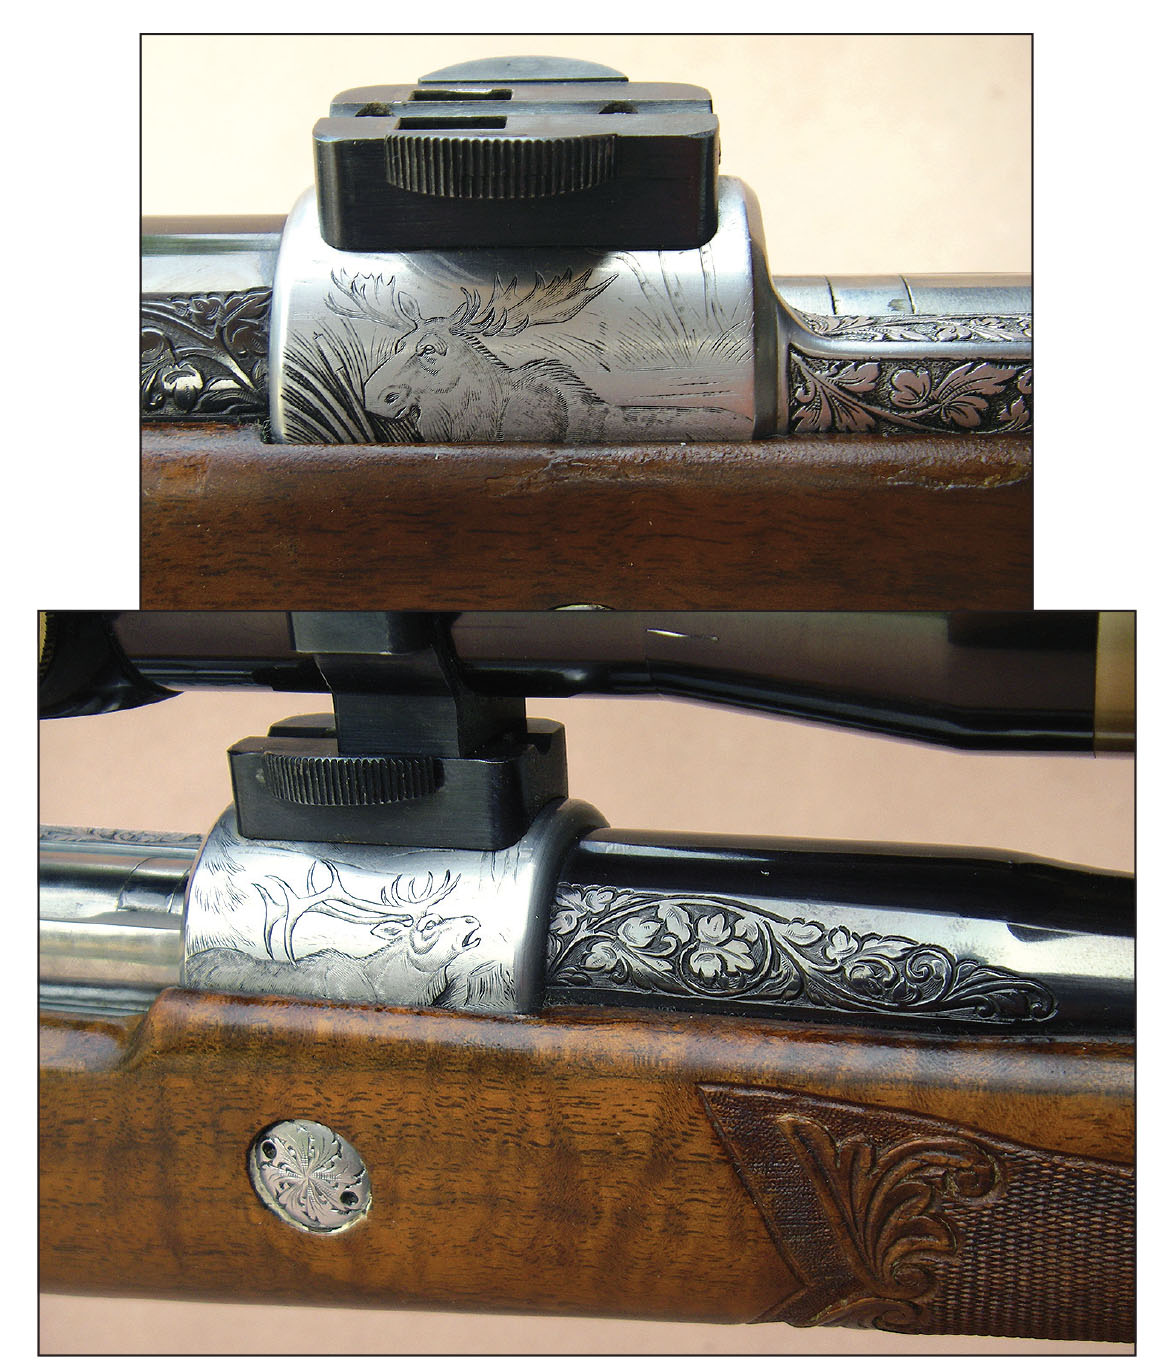 Olympian Grade High-Power rifles featured French Gray receivers that were scroll engraved, and many of these rifles were signed by the engraver.